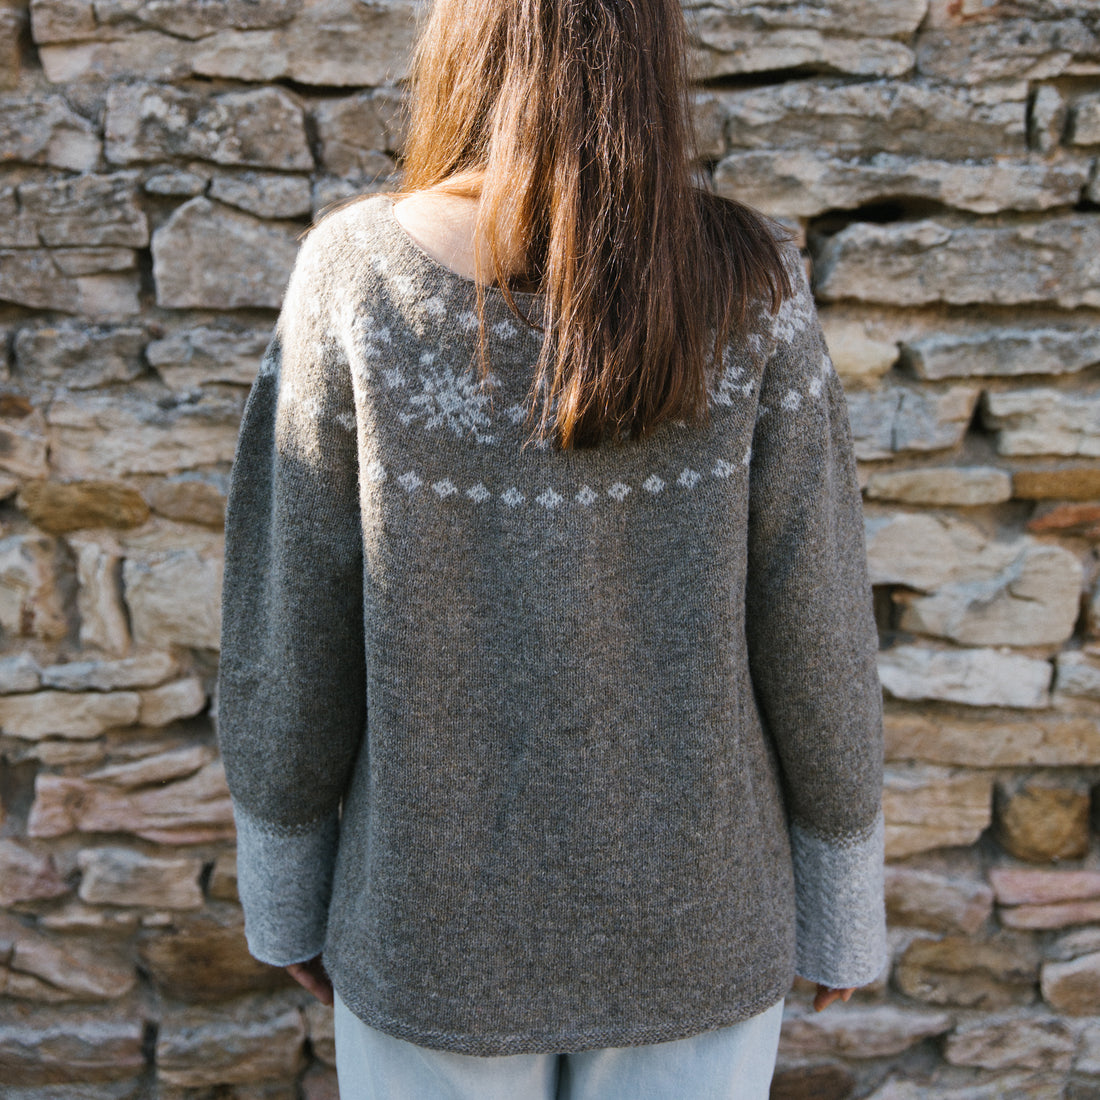 The Summer in Norway Sweater knitting kit